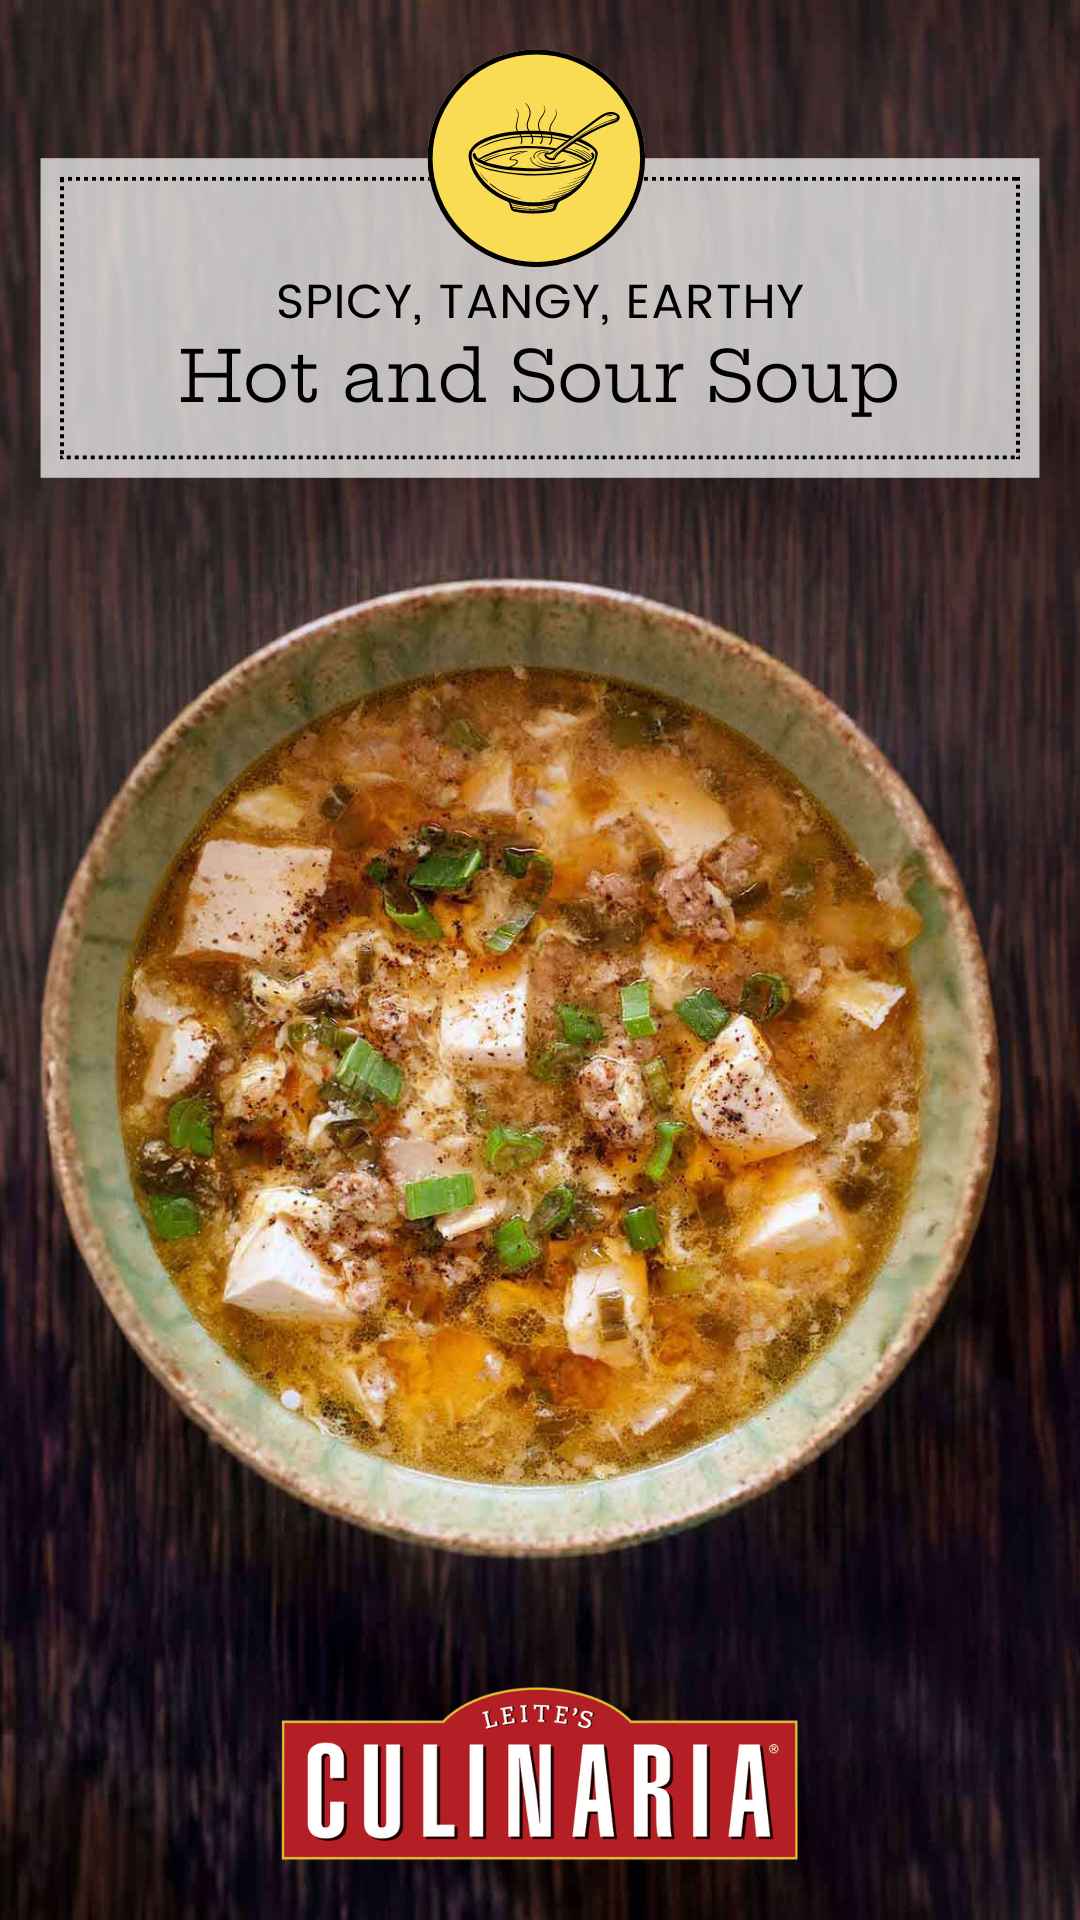 A bowl of hot and sour soup with tofu cubes and ground pork, topped with sliced scallions.